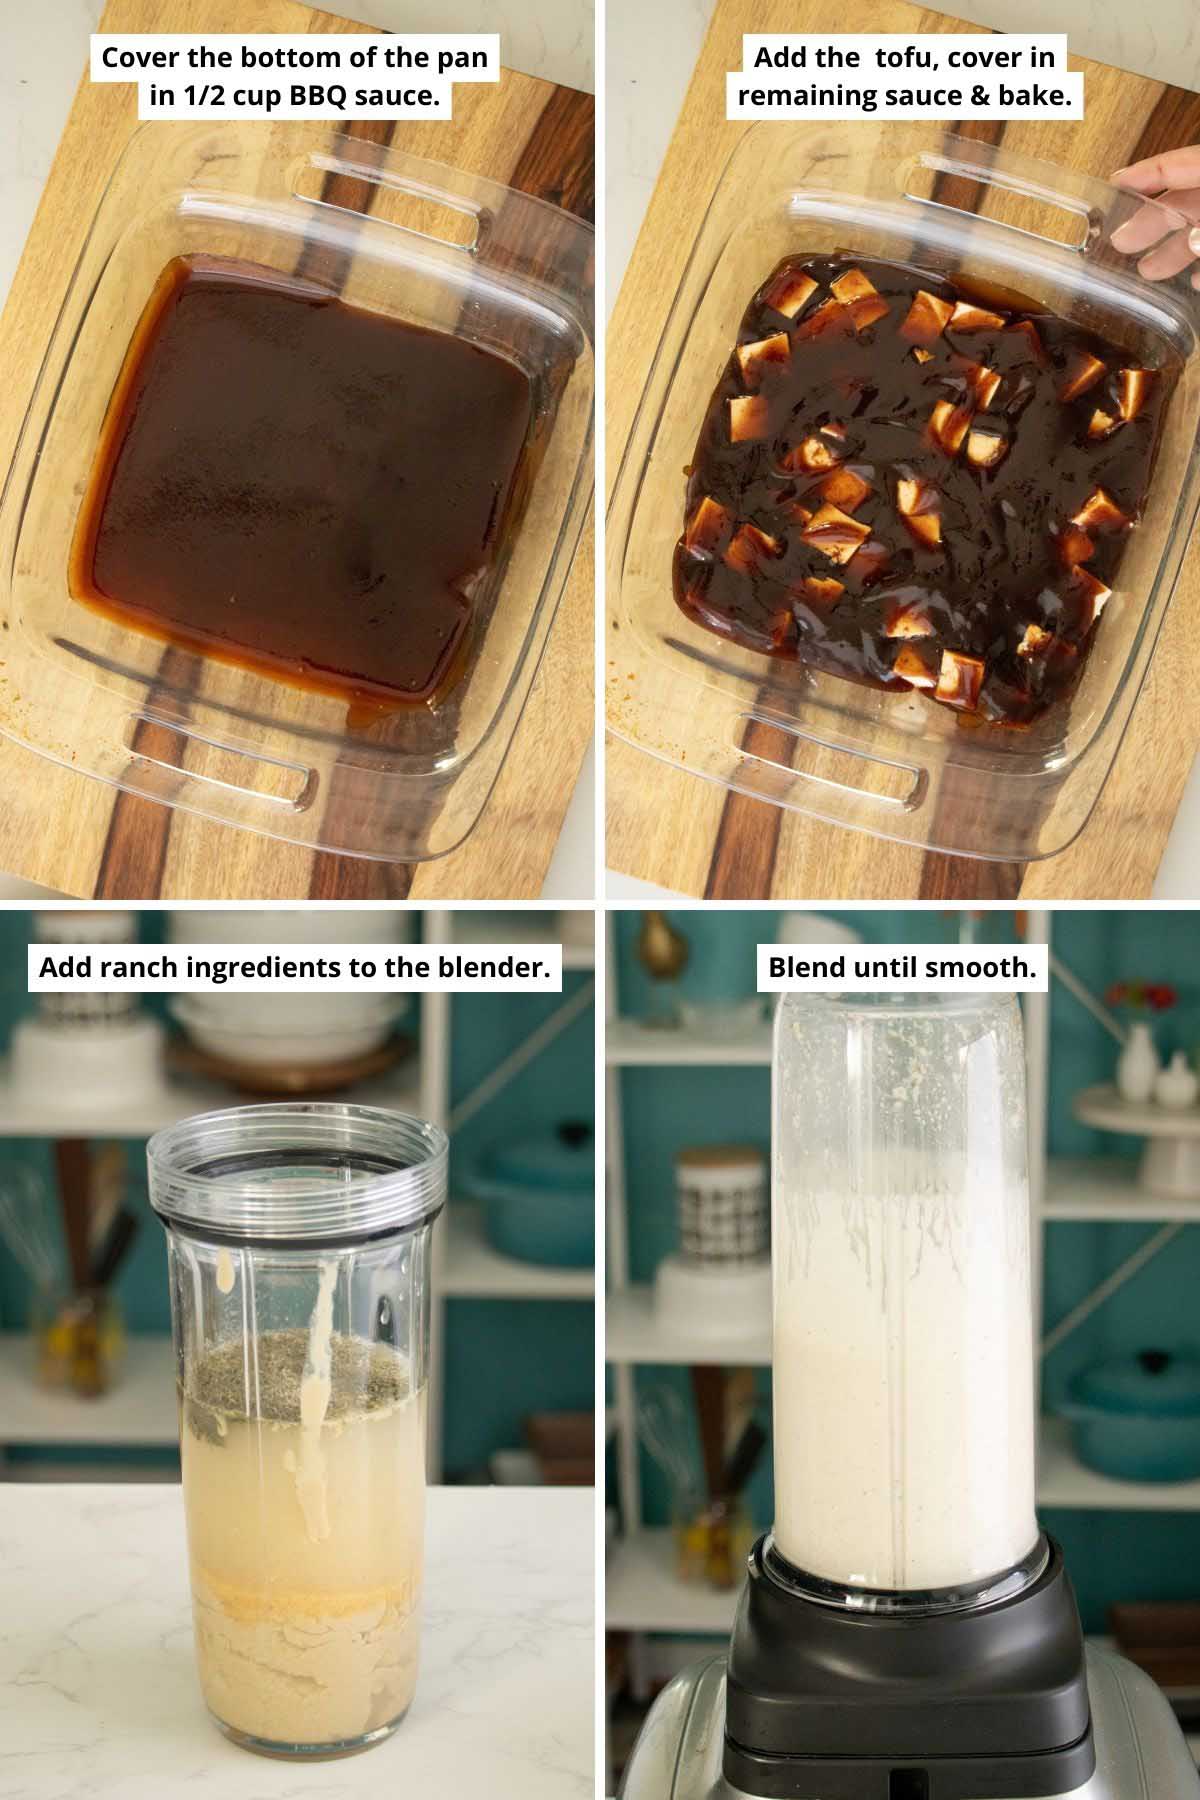 image collage showing bbq sauce in the pan and adding the tofu and more sauce and the ranch ingredients in the blender before and after blending